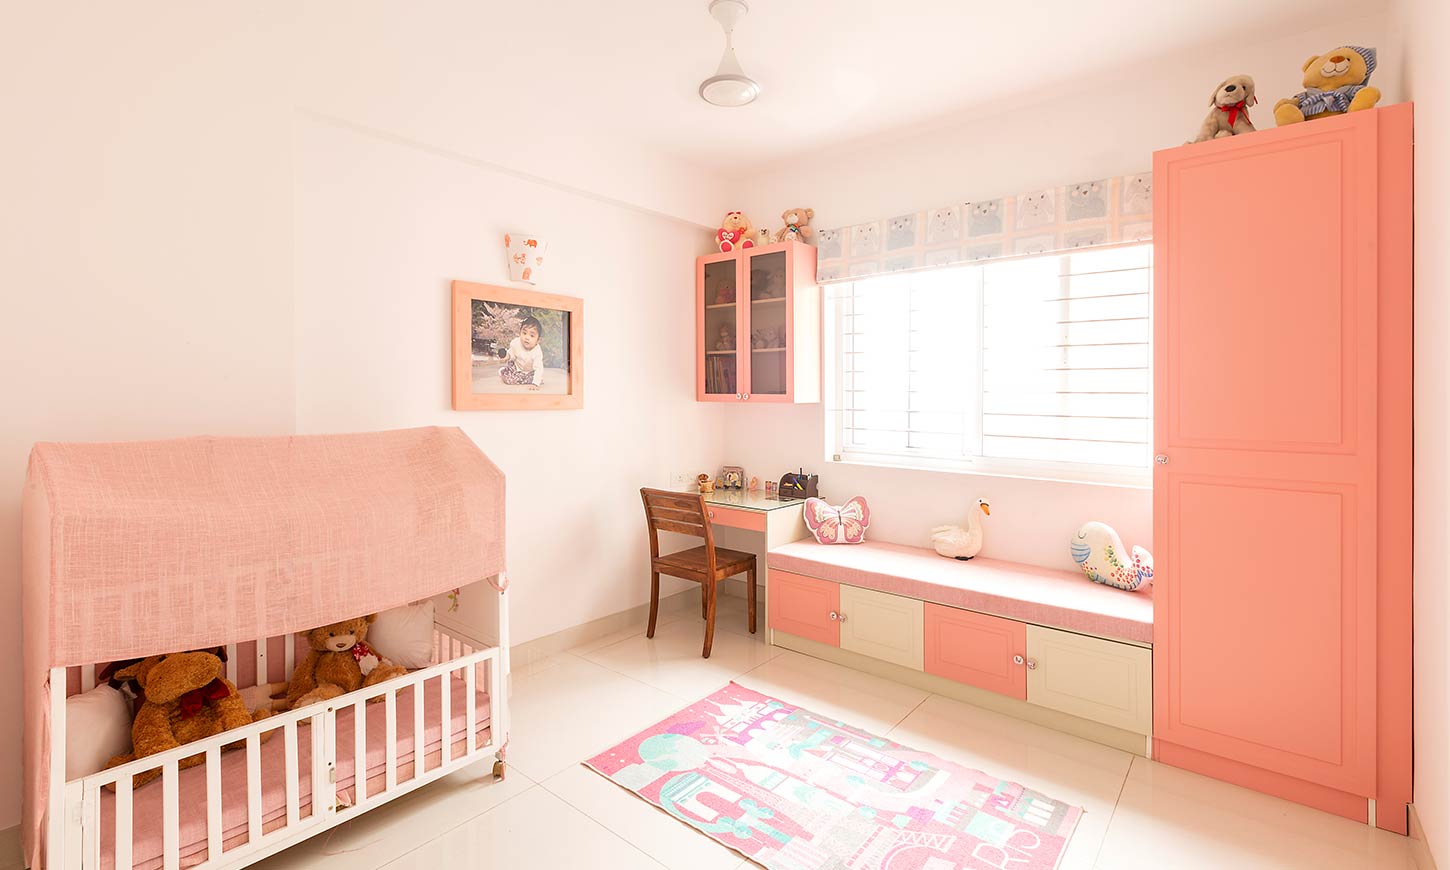 Kids room interior with study table designed by best interior design in bangalore